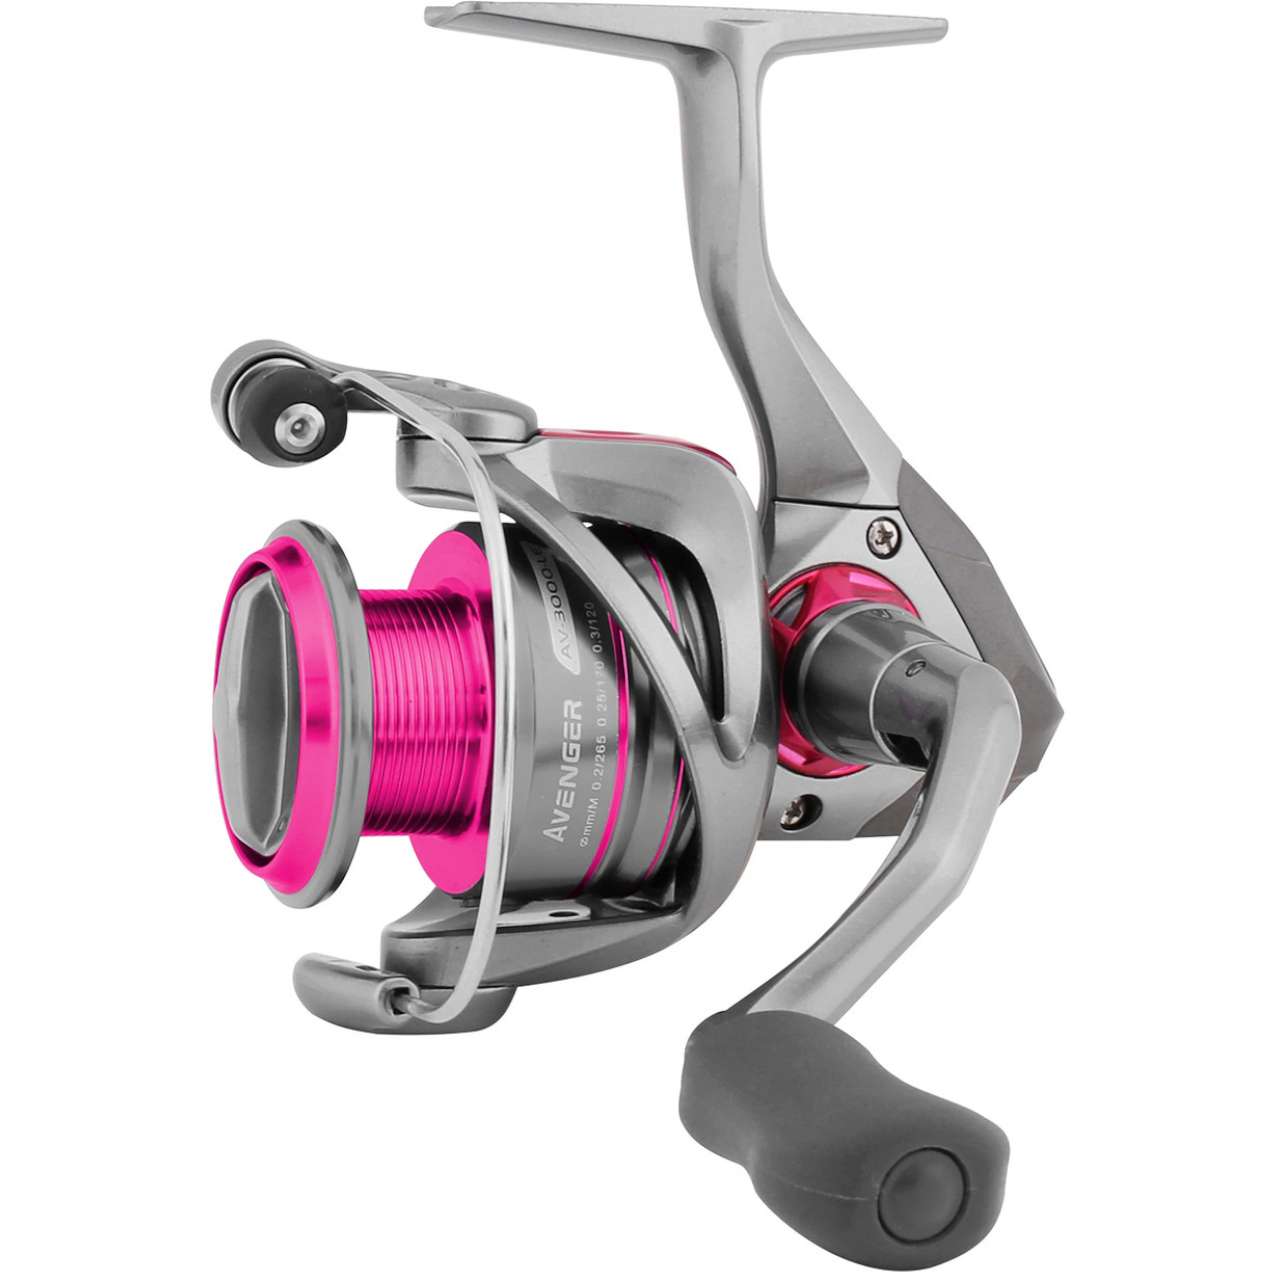 3000L High Capacity Casting Reel Right Hand